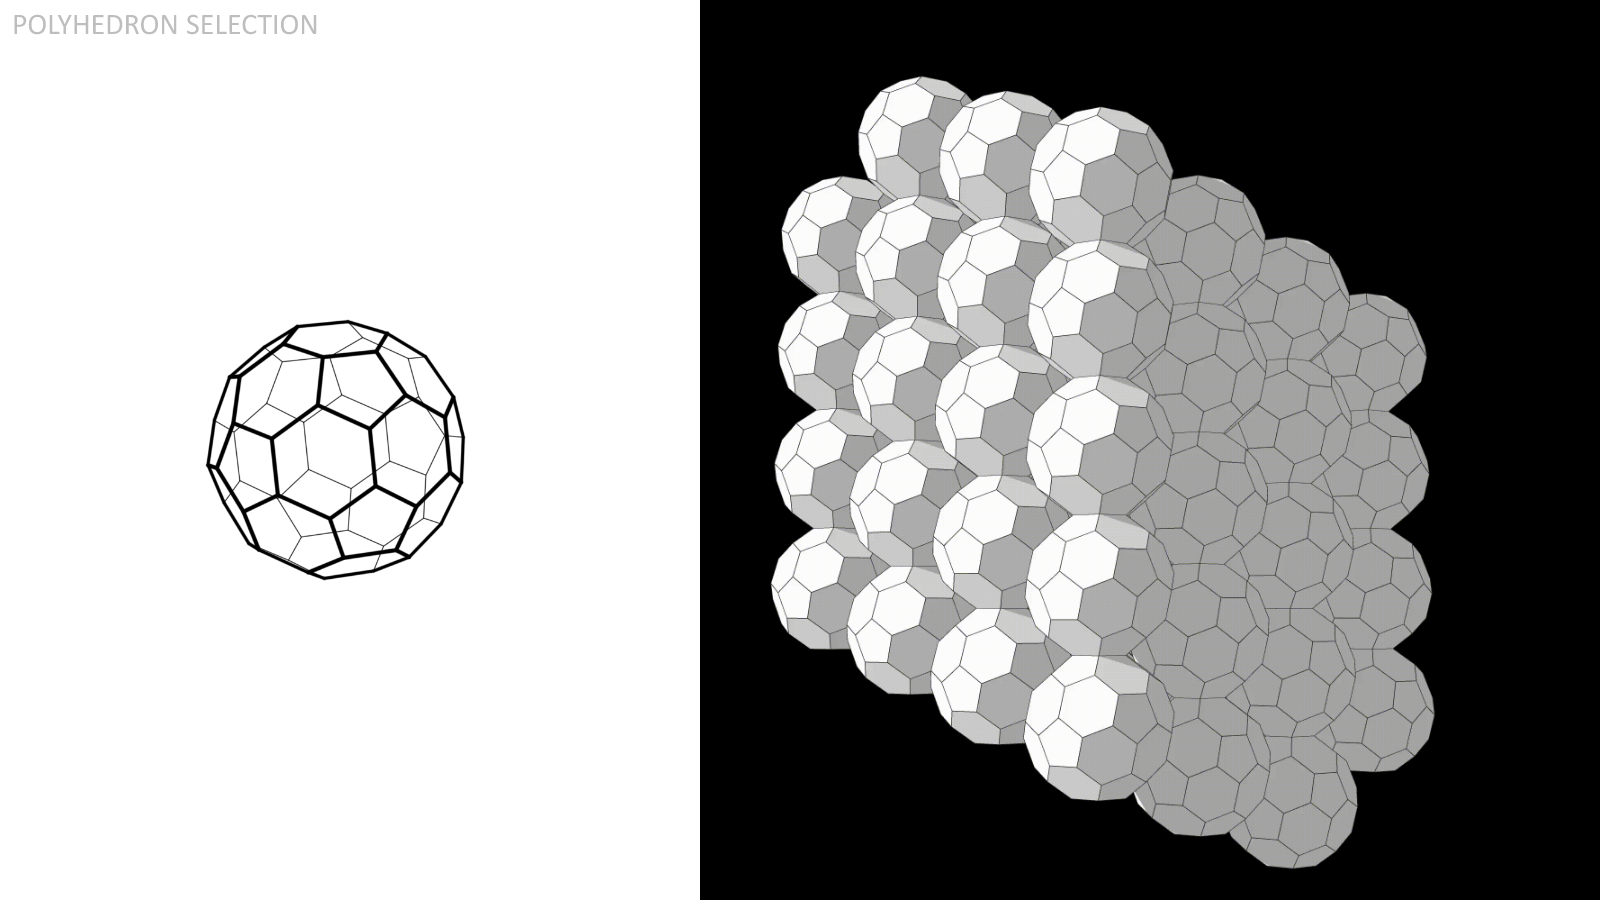  And finally the Truncated Icosahedron, composed of (20) regular hexagons and (12) regular pentagons. 